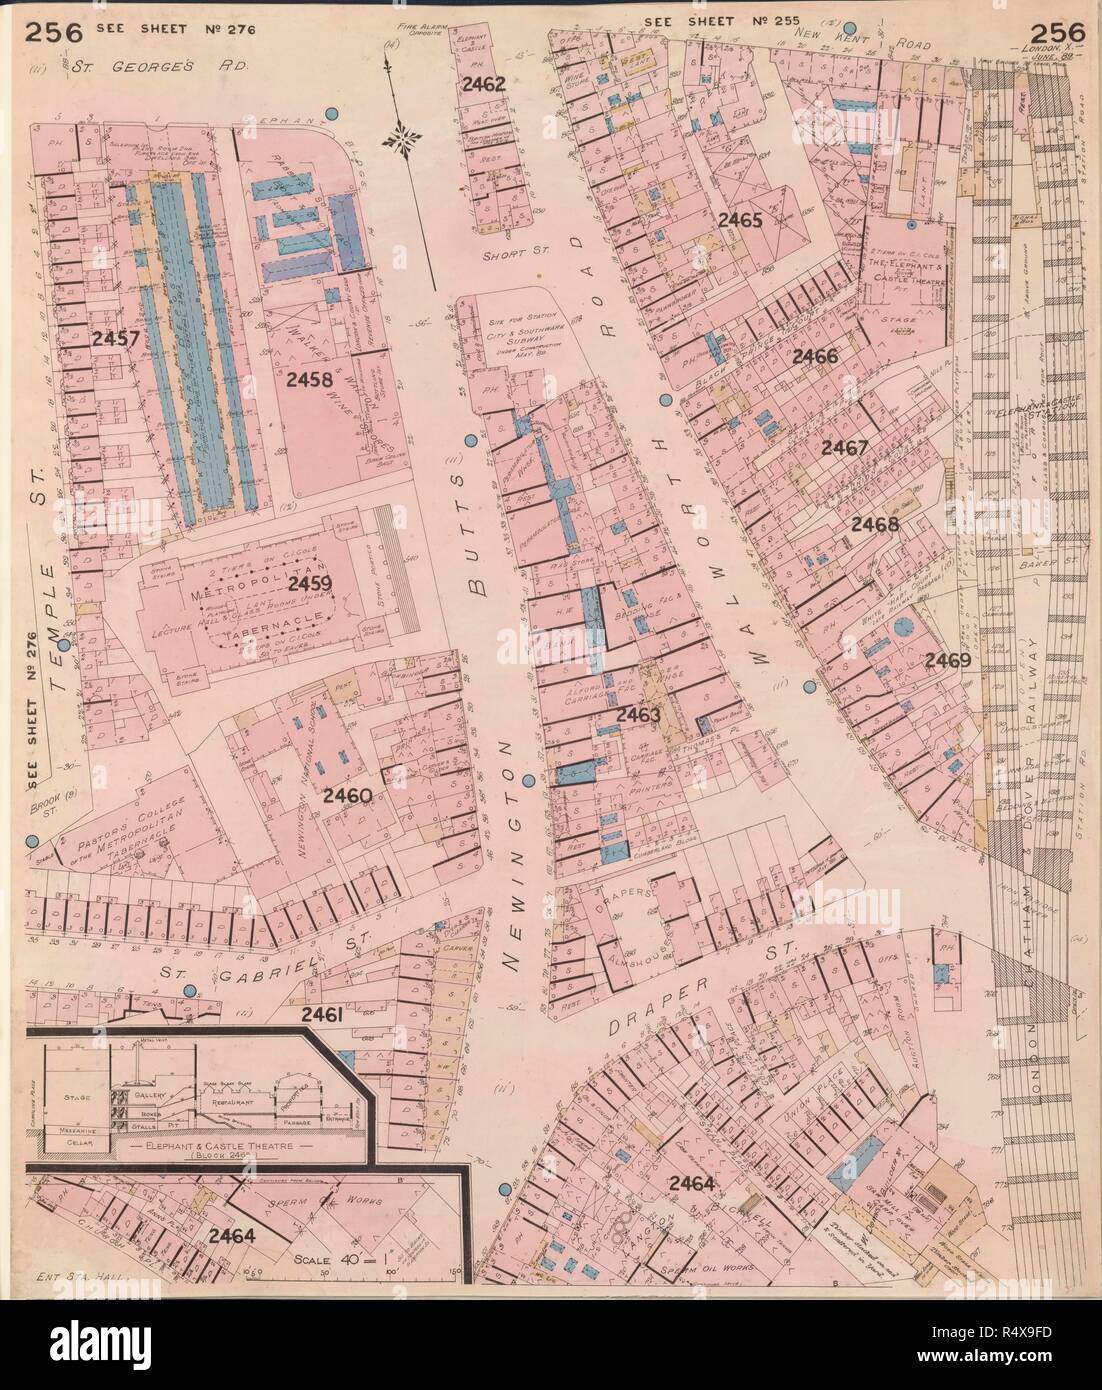 Insurance Plan of City of London. Insurance Plan of City of London. [By] C.E. Goad Scale, 40 ft. = 1 inch Key-plan, 200 ft. = 1 inch... London, 1886, 1897. Source: Maps 145.b.22, 256. Language: English. Stock Photo